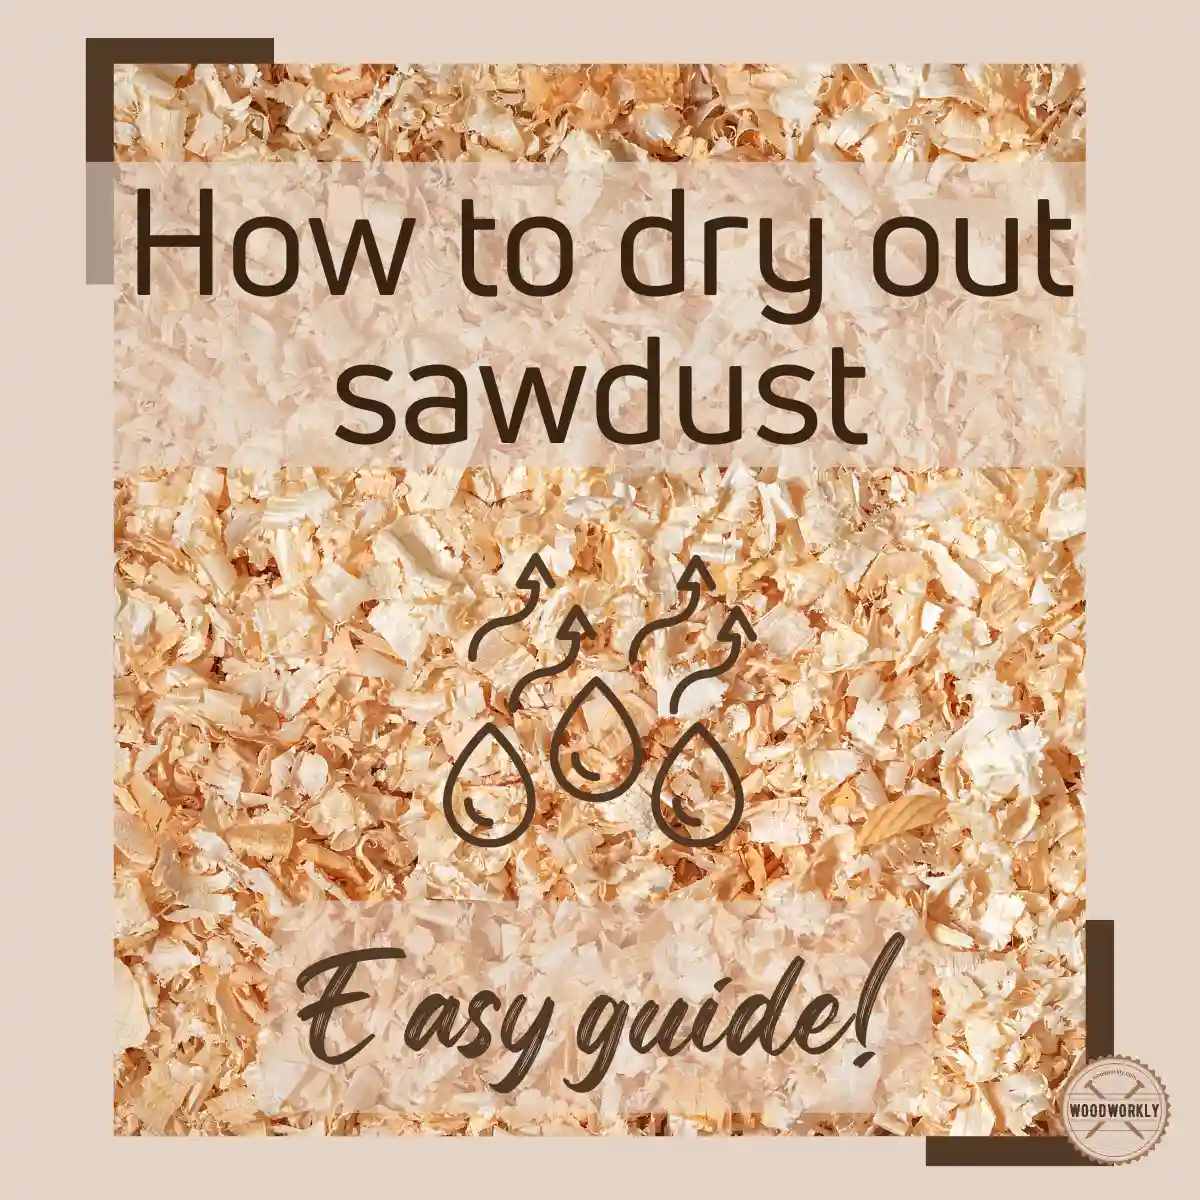 How to dry out sawdust